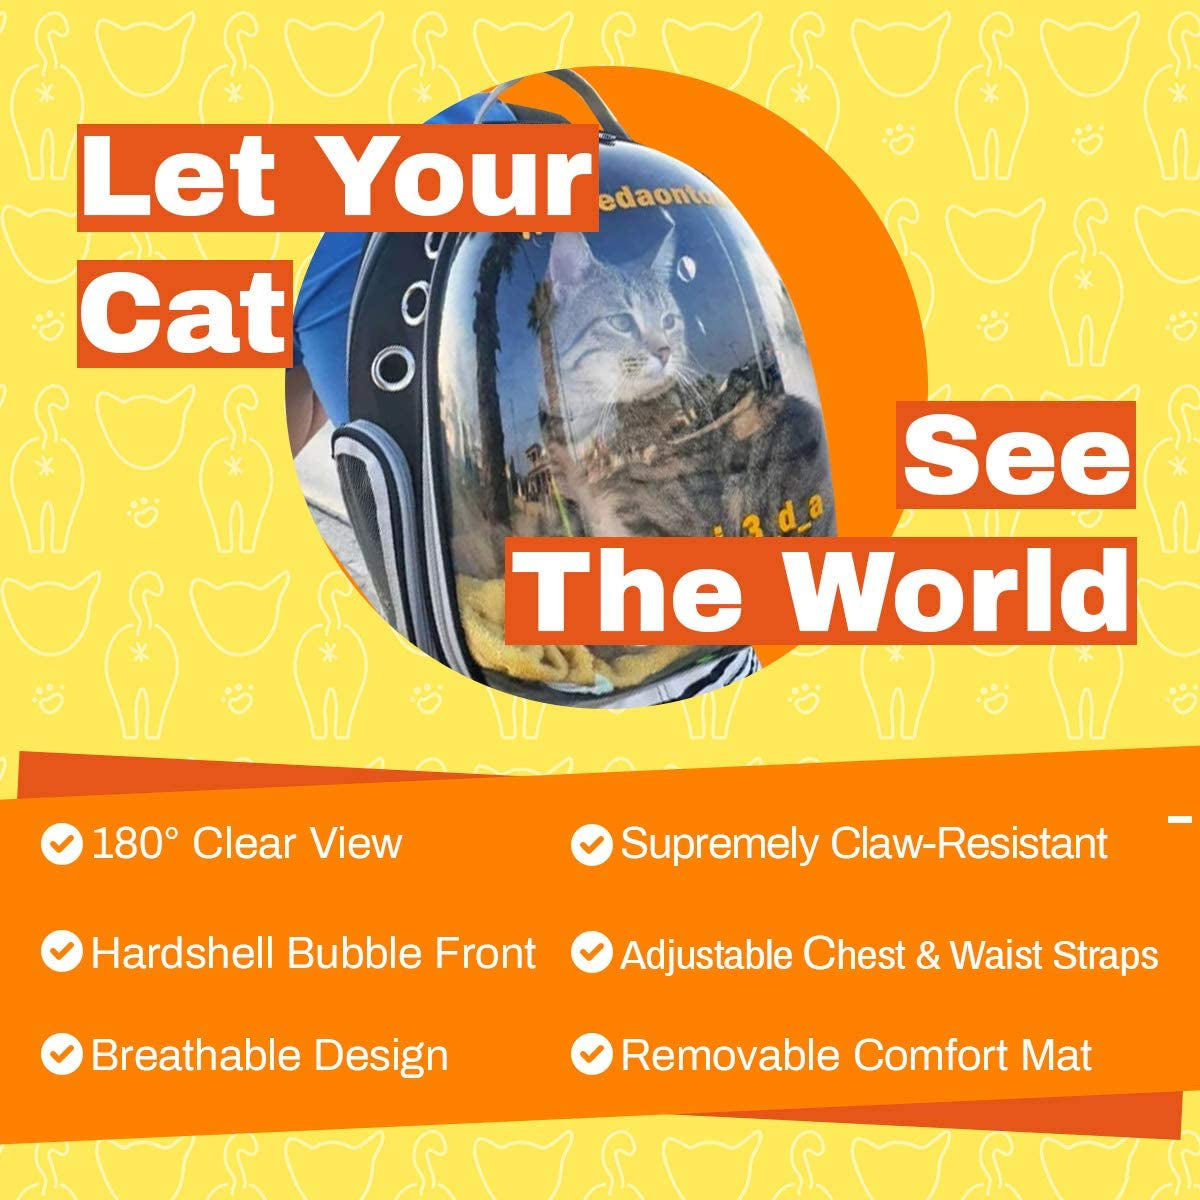 Carrier Bag - Premium Transparent Bubble Capsule Pet Carriers for Small Cats, Kitten, Carry - Green Voyager Airline Approved Backpacks for Travel, Hiking, Walking, Outdoor